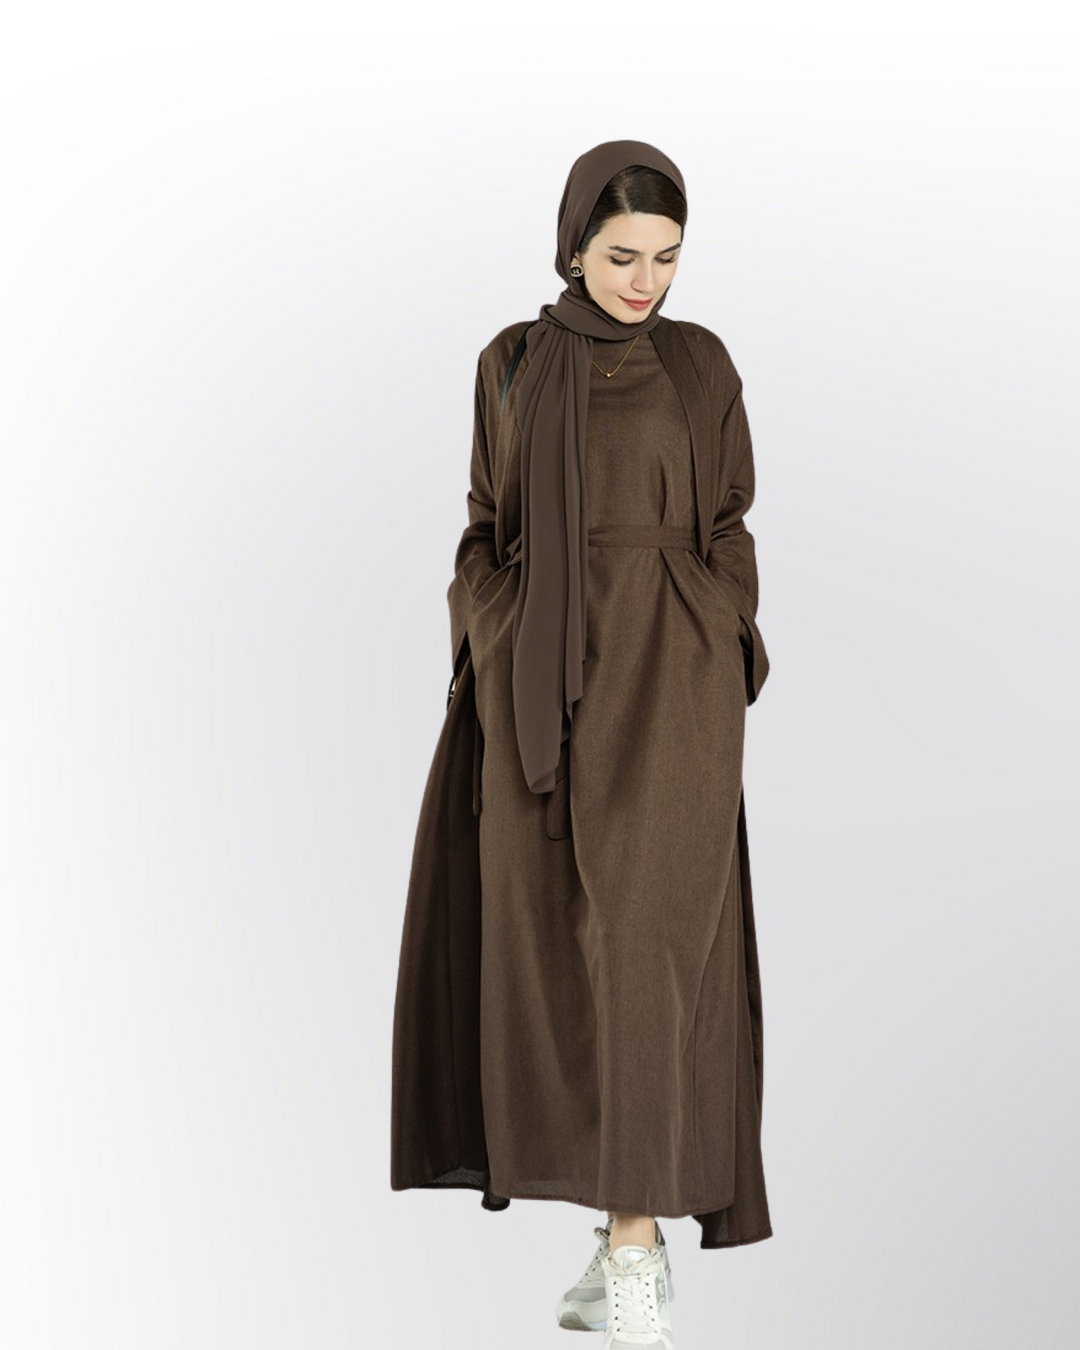 Get trendy with Elora Linen Set - Brown - Dresses available at Voilee NY. Grab yours for $99.90 today!